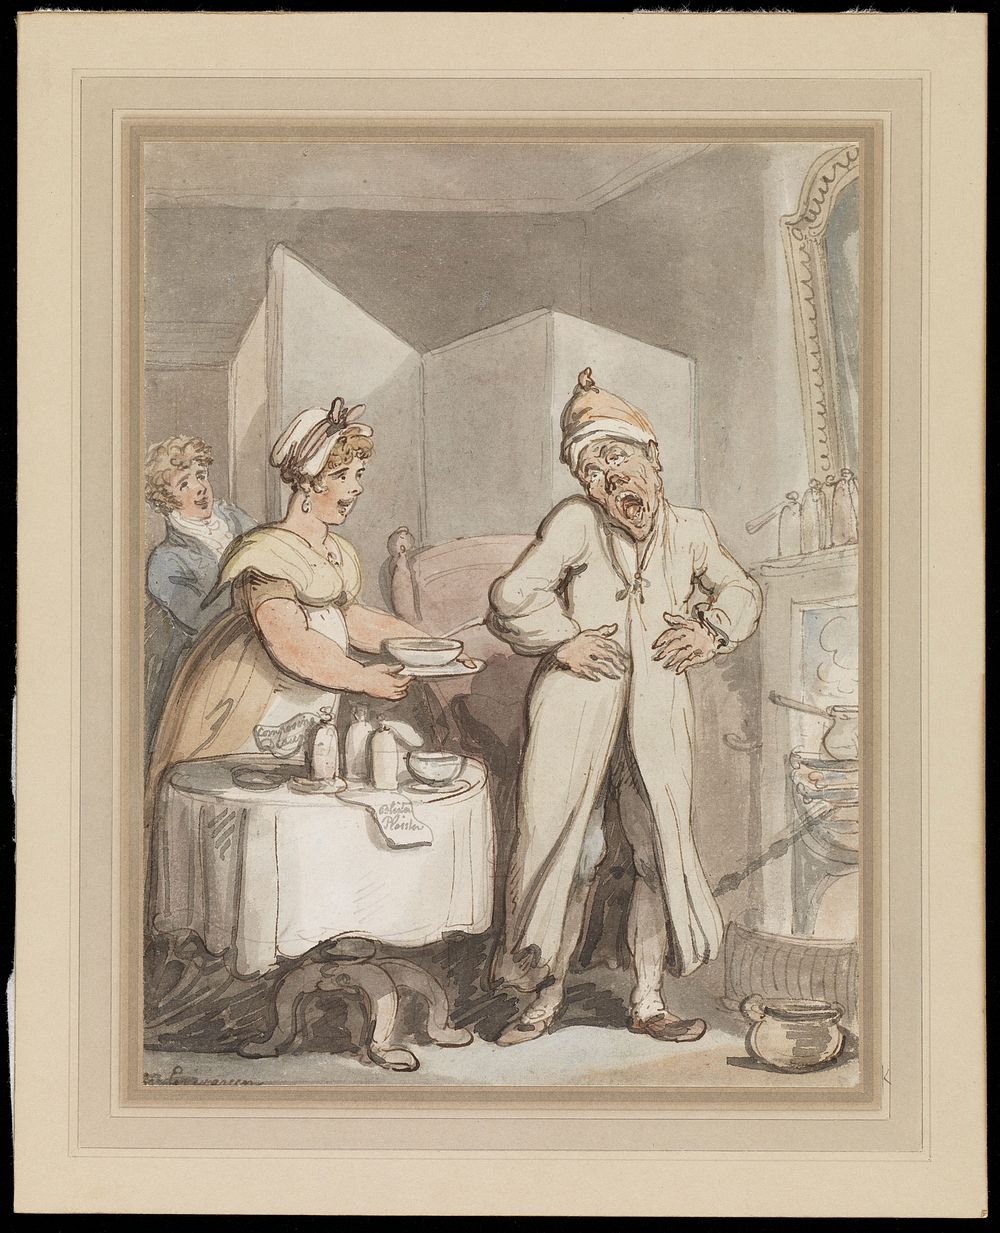 A man in pain receiving medicines from a housemaid. Watercolour by T. Rowlandson.